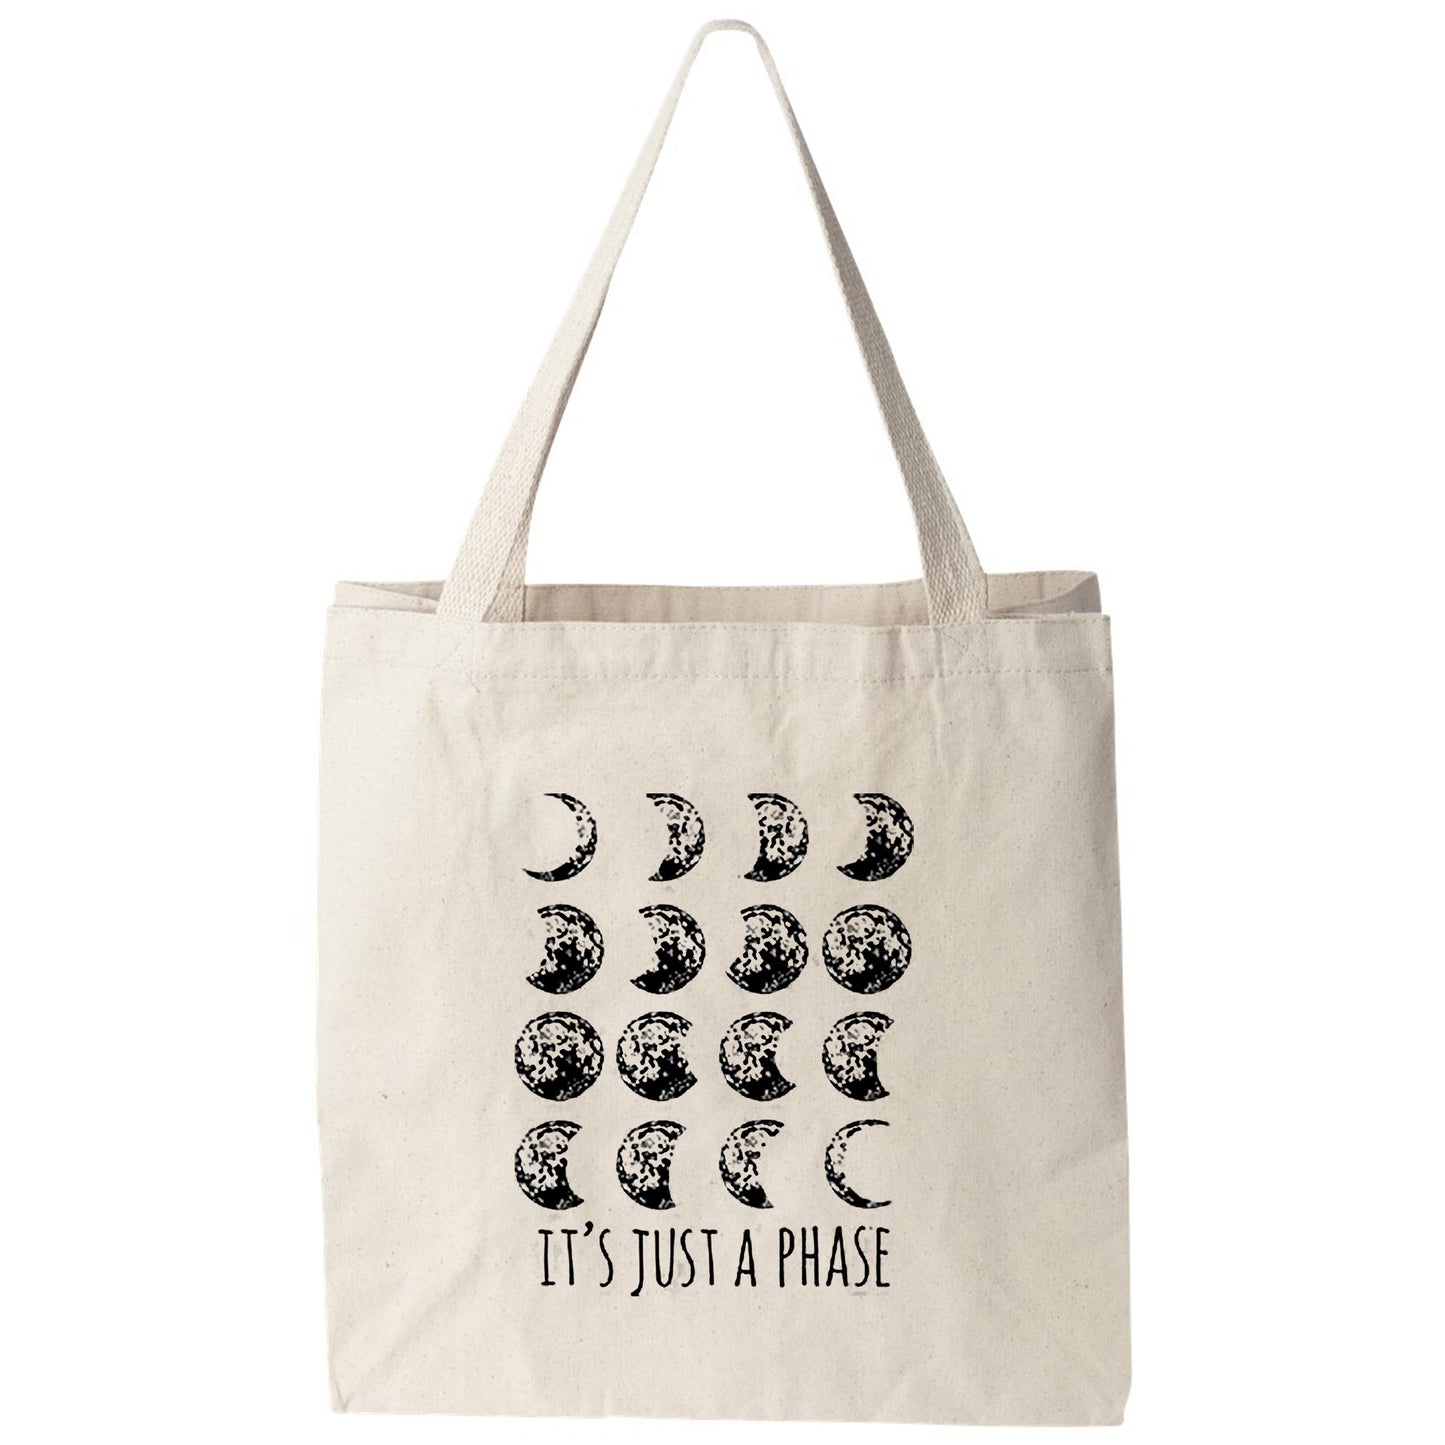 a tote bag that says it's just a phase